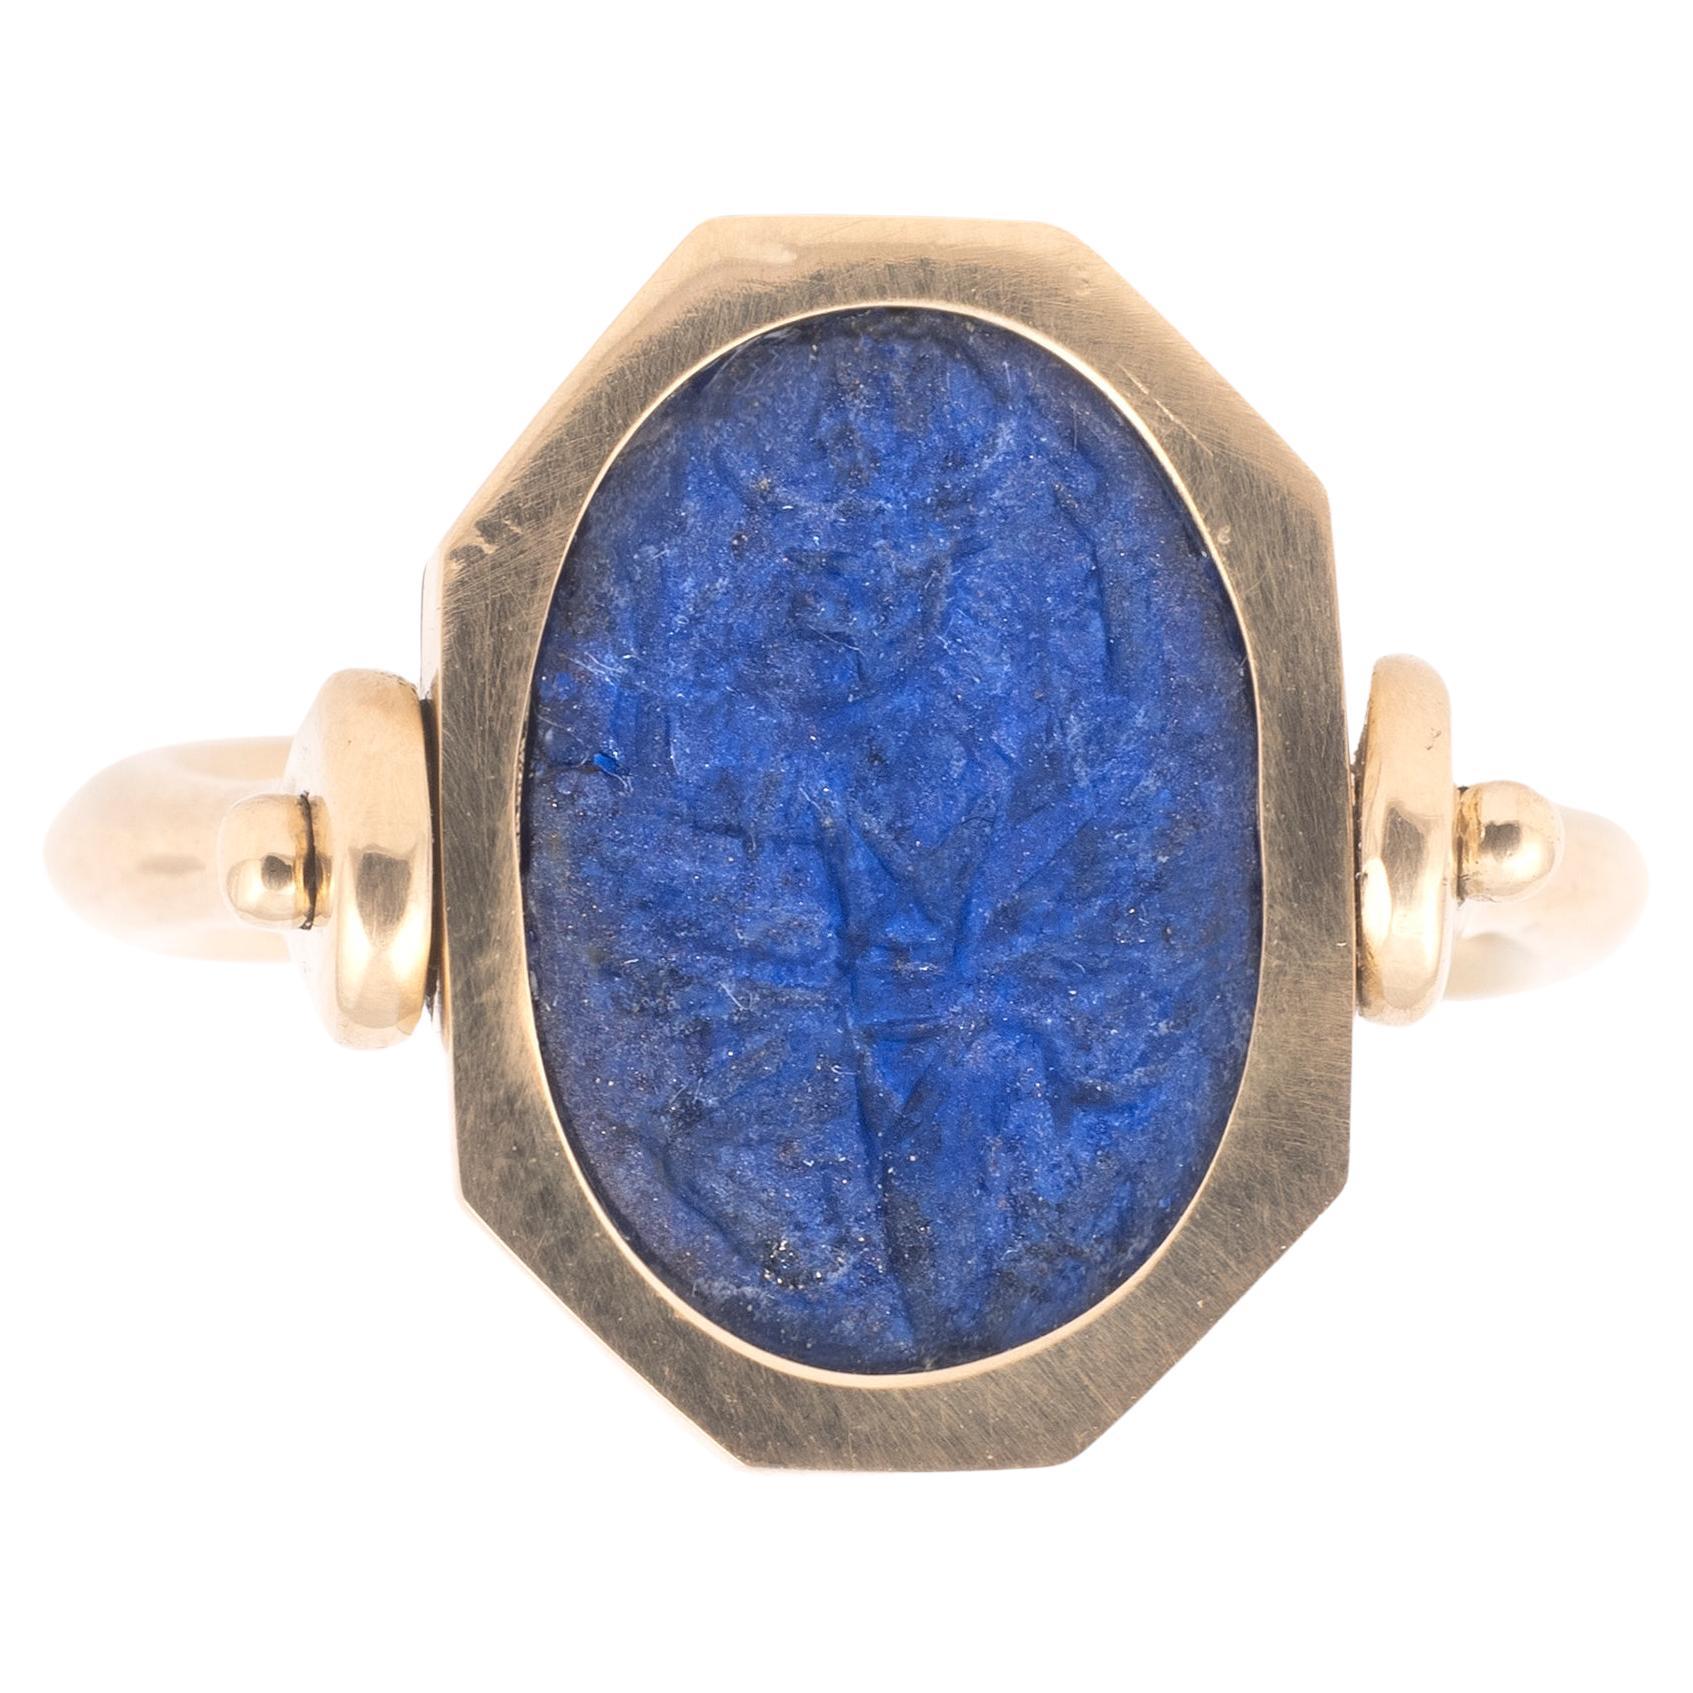 A Lapis Lazuli Gnostic Intaglio Ring 2nd-3rd Century AD In Excellent Condition For Sale In Firenze, IT